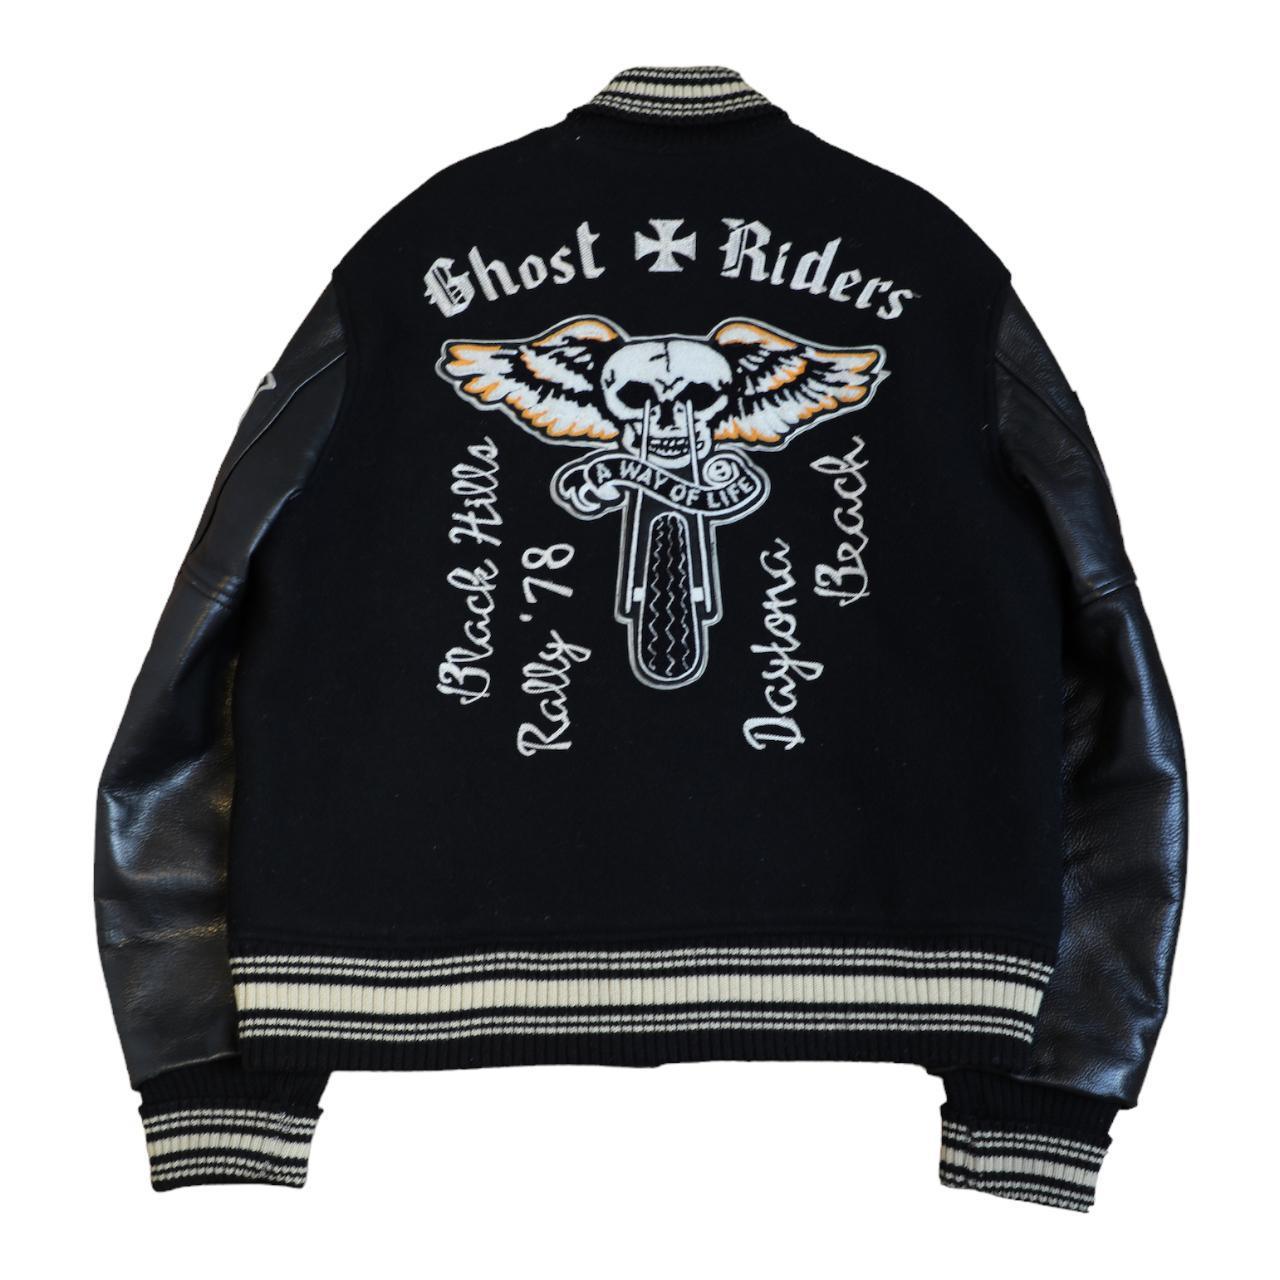 Whitesville 1978 Ghost Riders Motorcycle Club jacket Black/White - Known Source